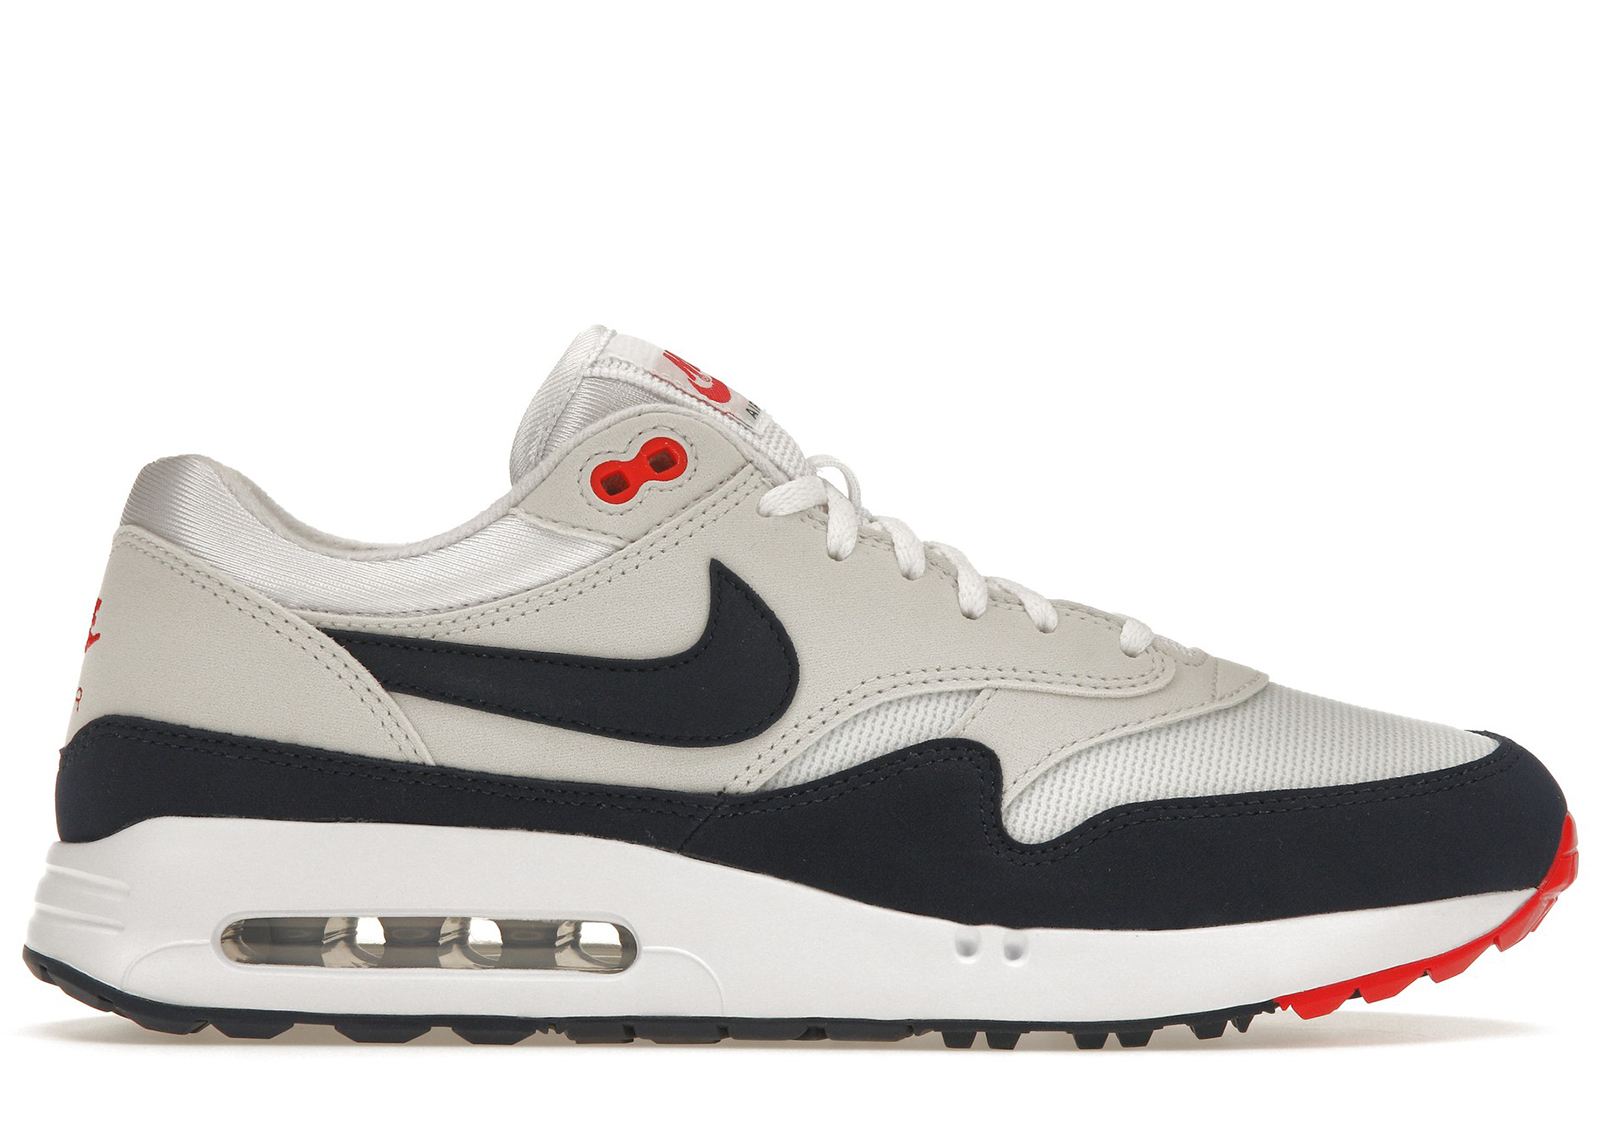 Nike Air Max 1 '86 OG Big Bubble Sport Red Men's - DQ3989-100 - US